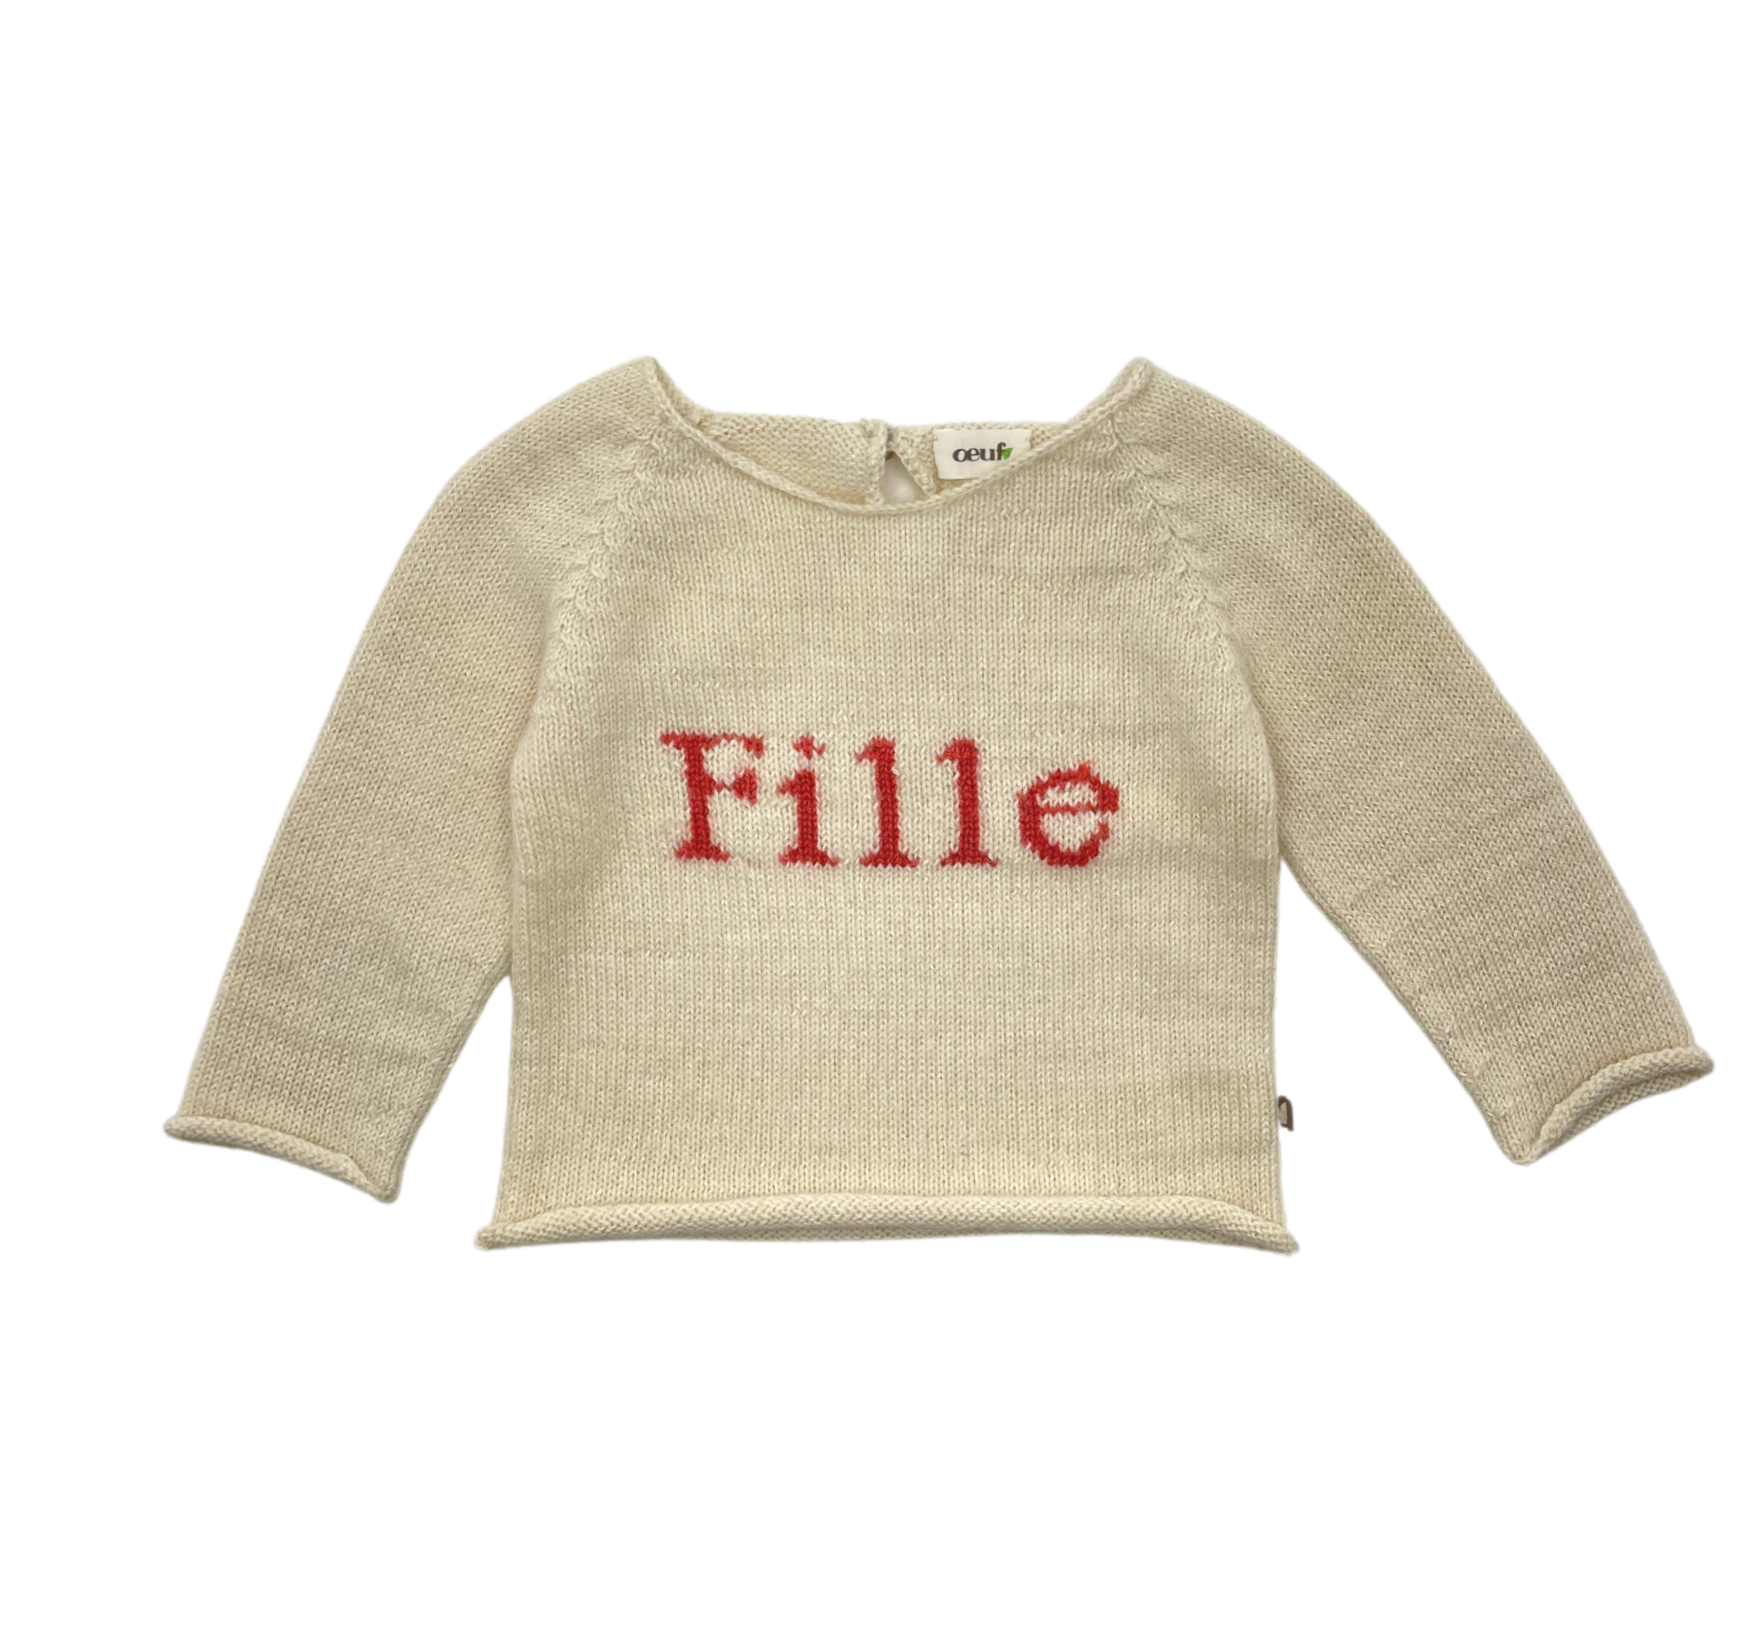 OEUF NYC - Pull "fille" - 12 mois